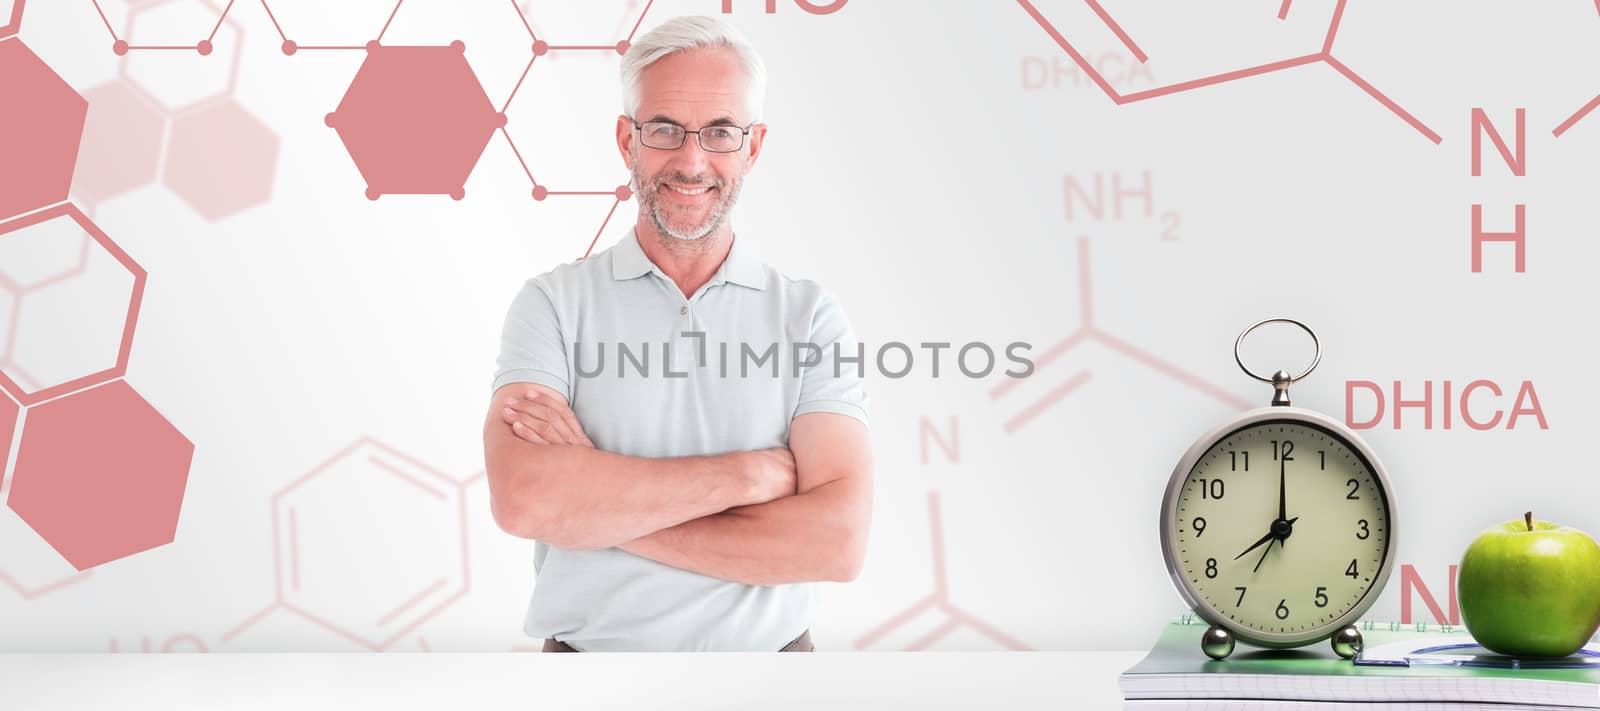 Mature student smiling  against white background with vignette